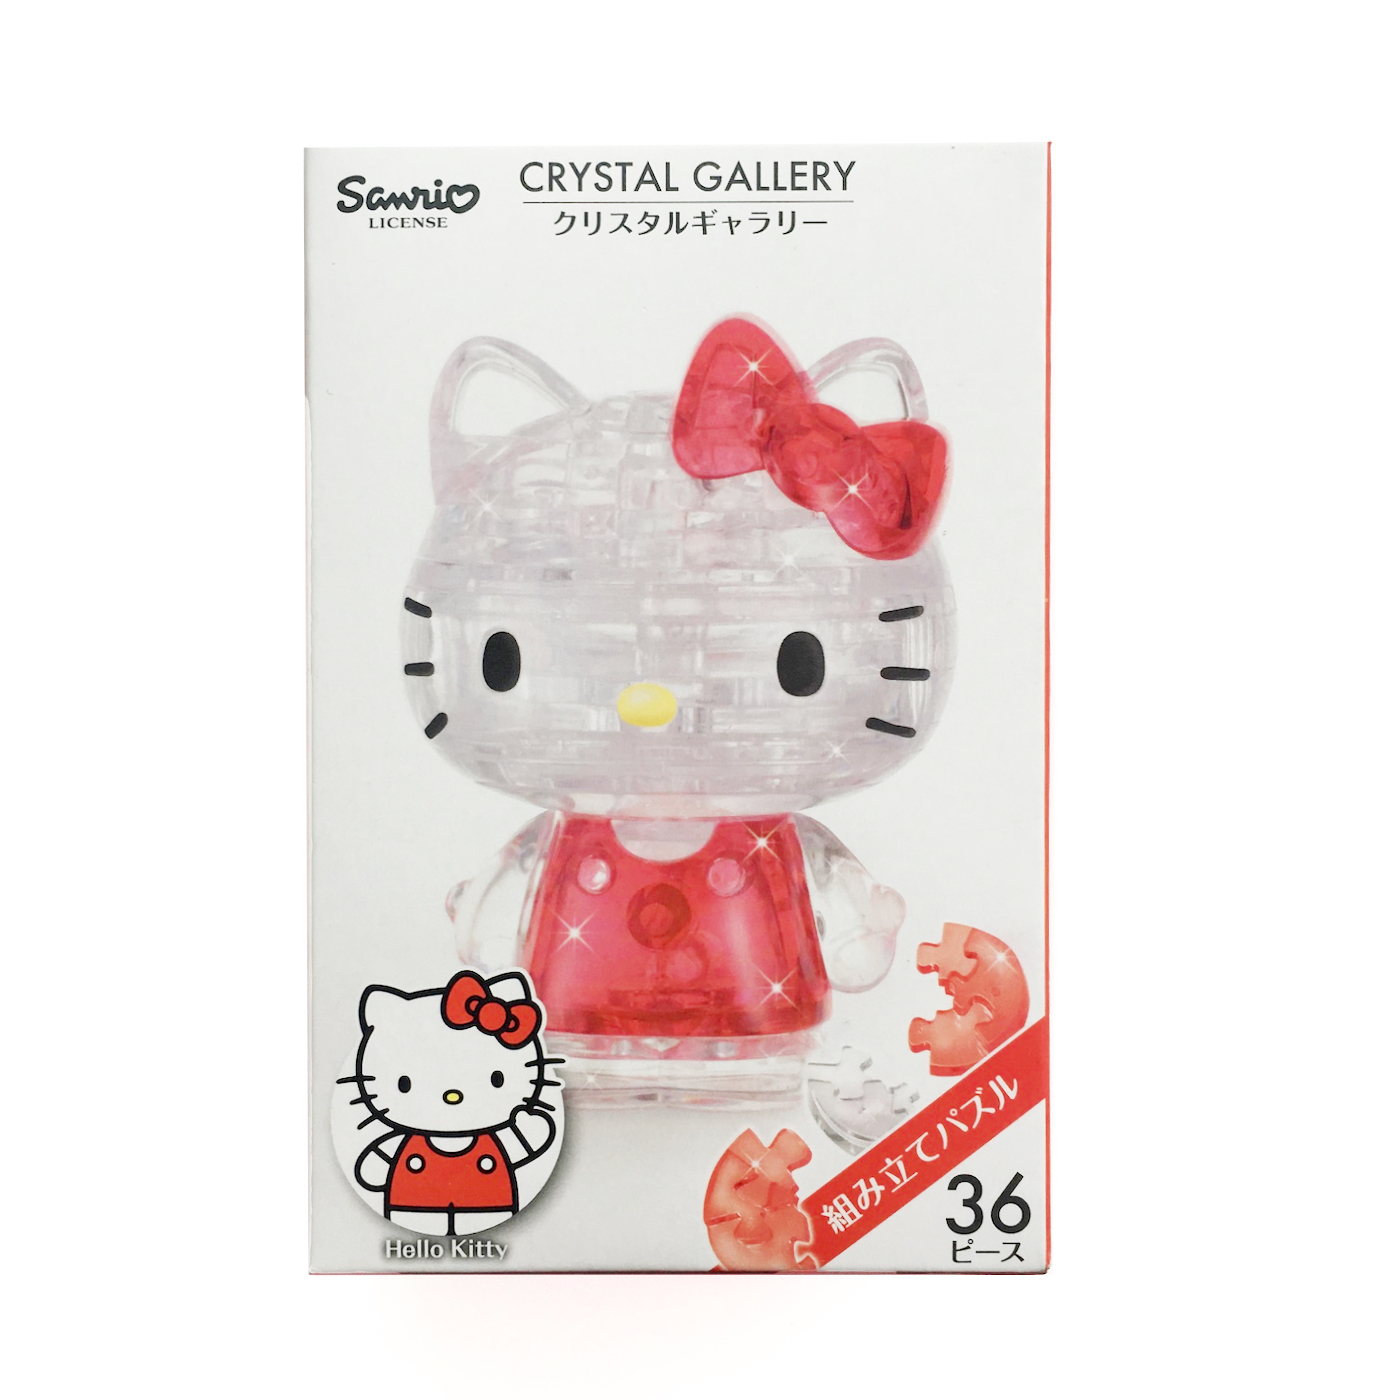 Crystal Gallery 3d Puzzle Sanrio Hello Kitty 36 Pcs Hanayama for sale online 